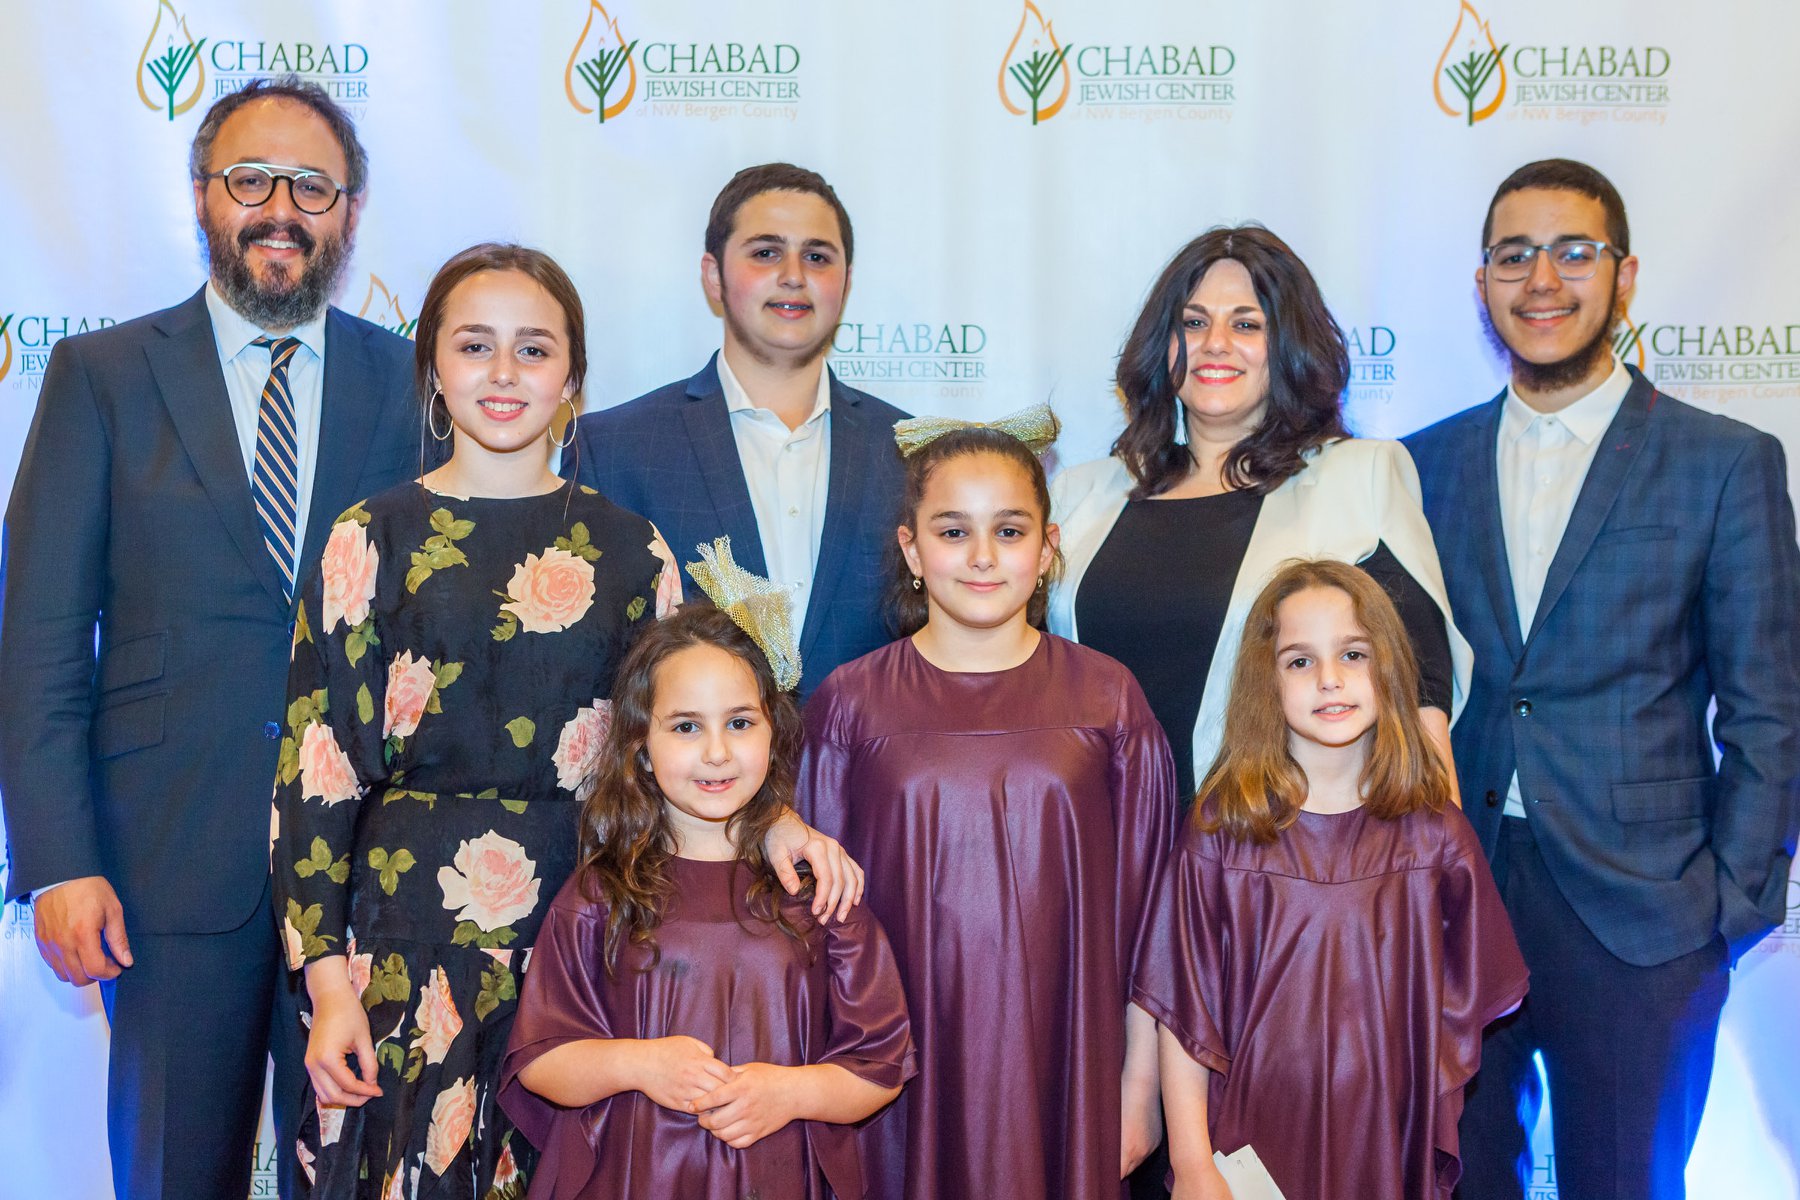 Rabbi Chanoch and Mimi Kaplan,  - Chabad of Franklin Lakes, NJ   - Our Own Little Corner of New Jersey